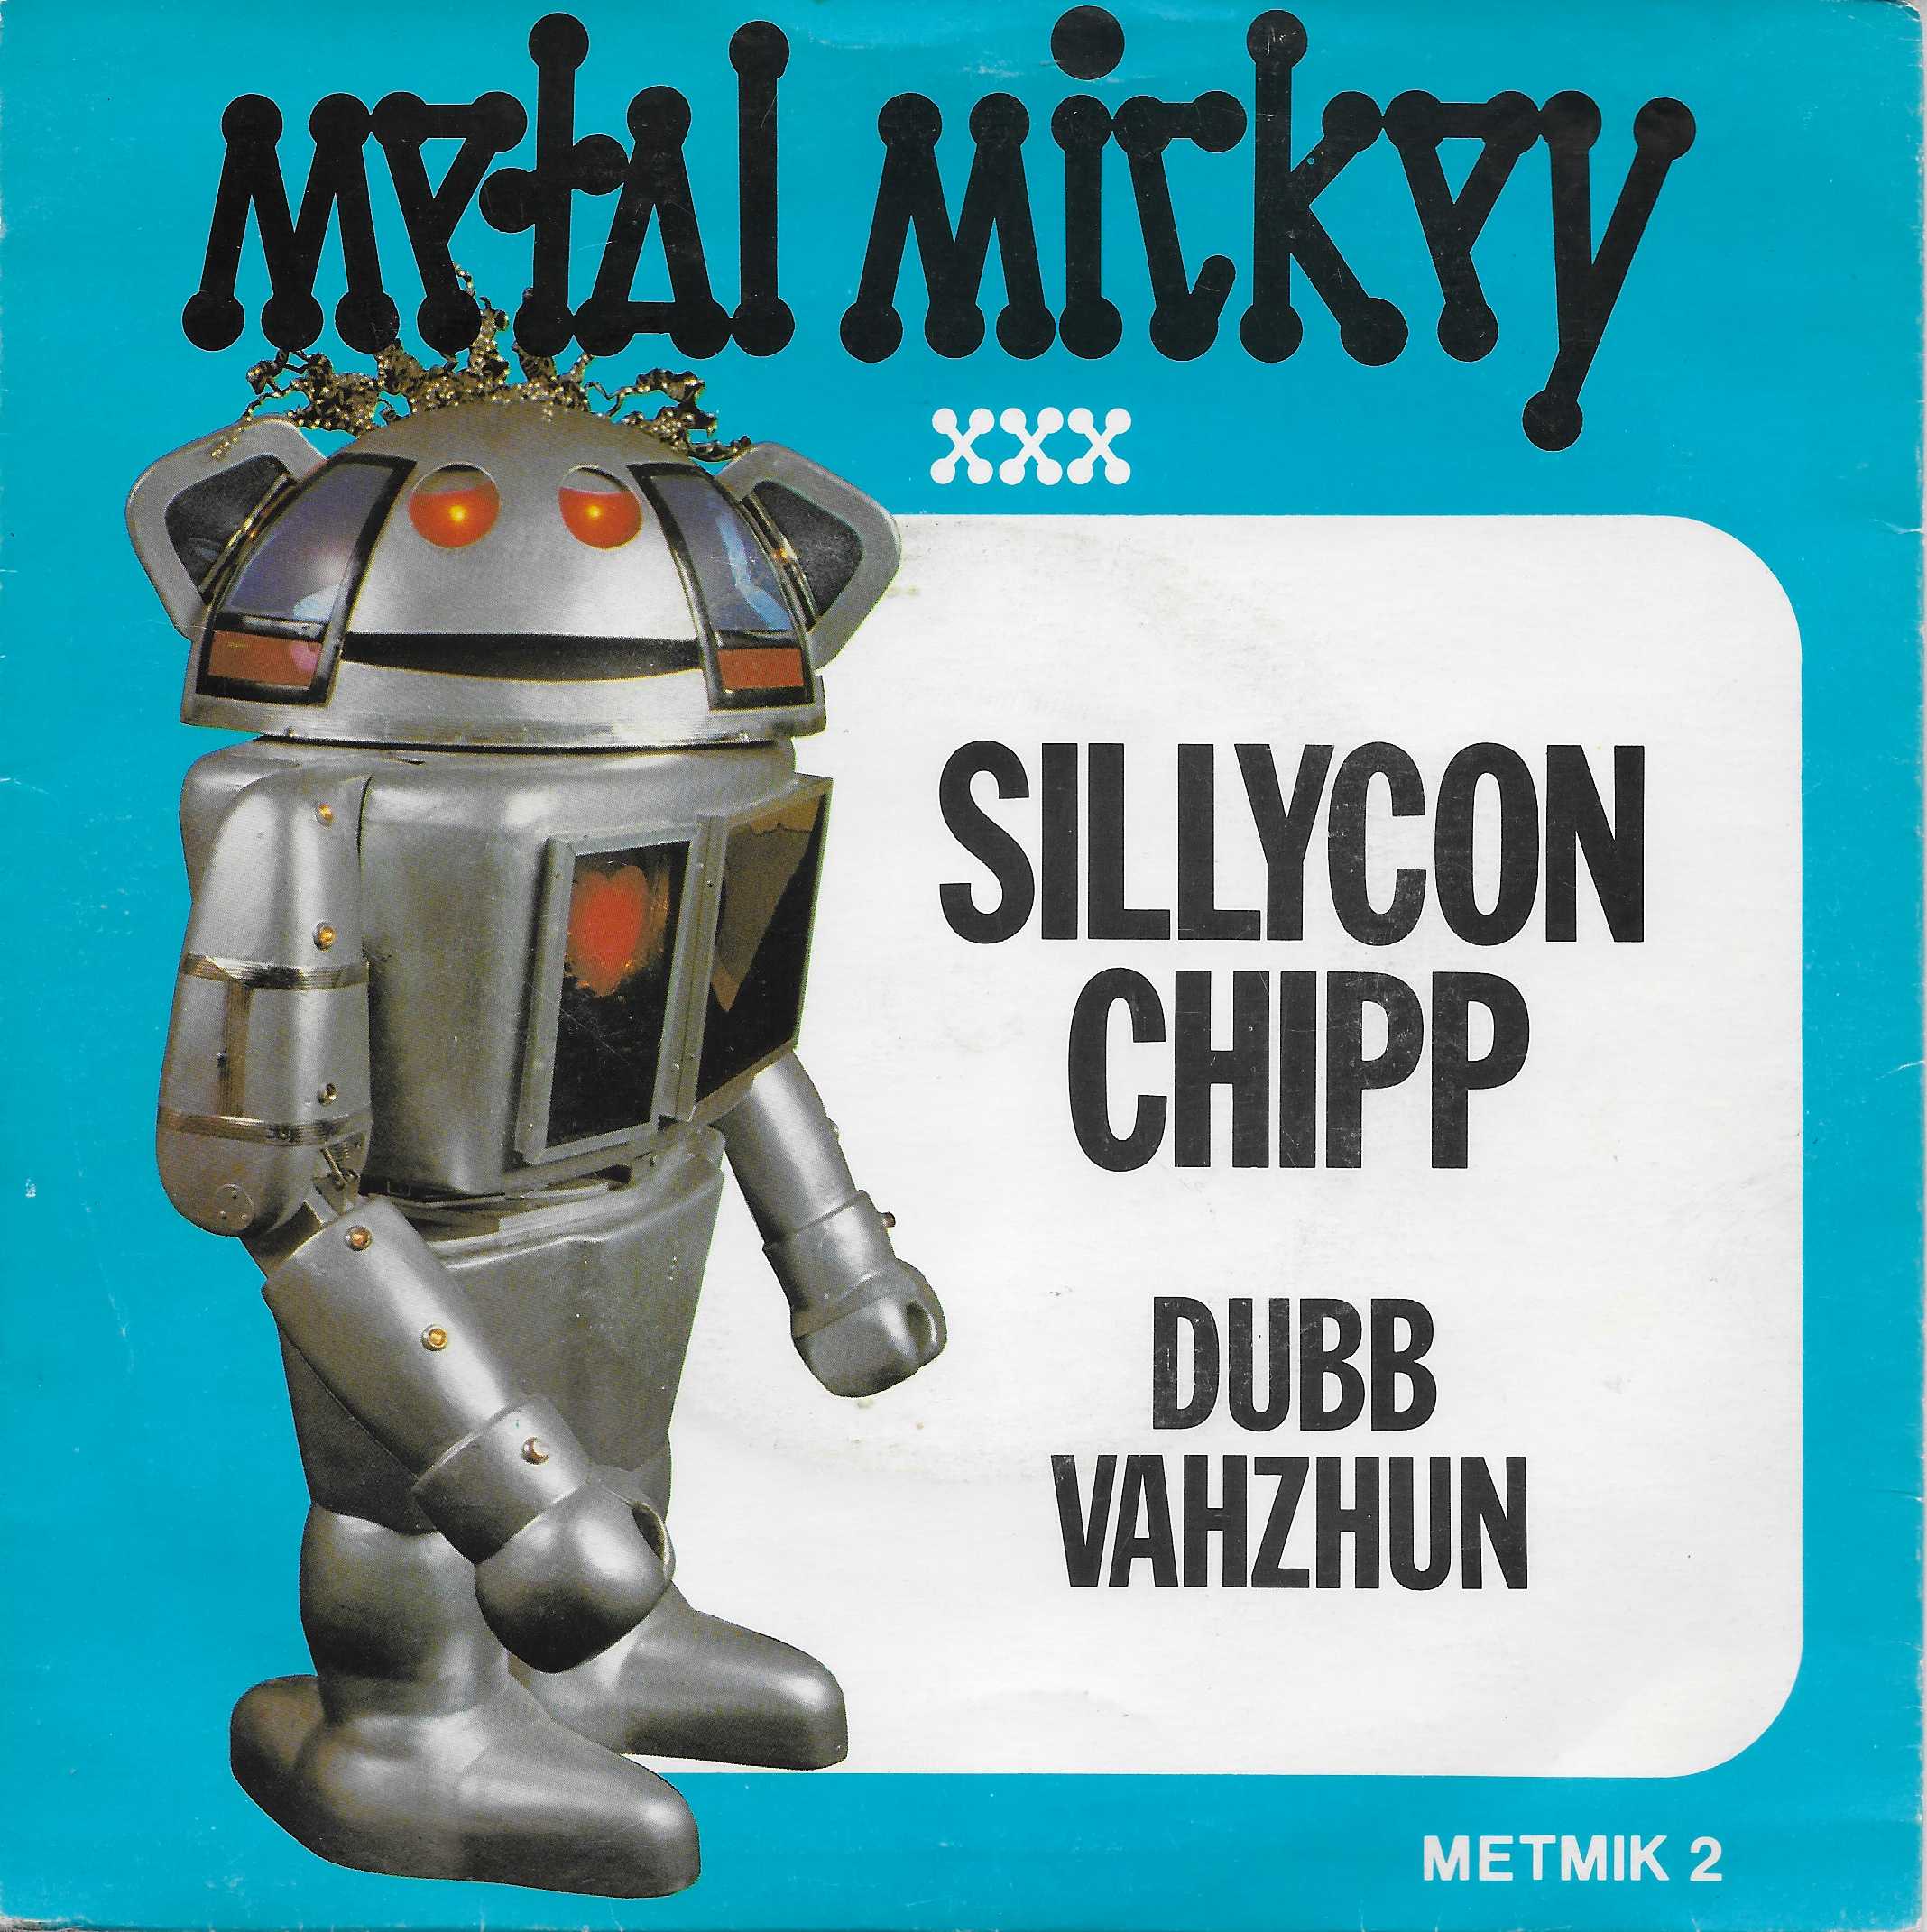 Picture of Sillycon chipp by artist Metal Mickey from ITV, Channel 4 and Channel 5 singles library